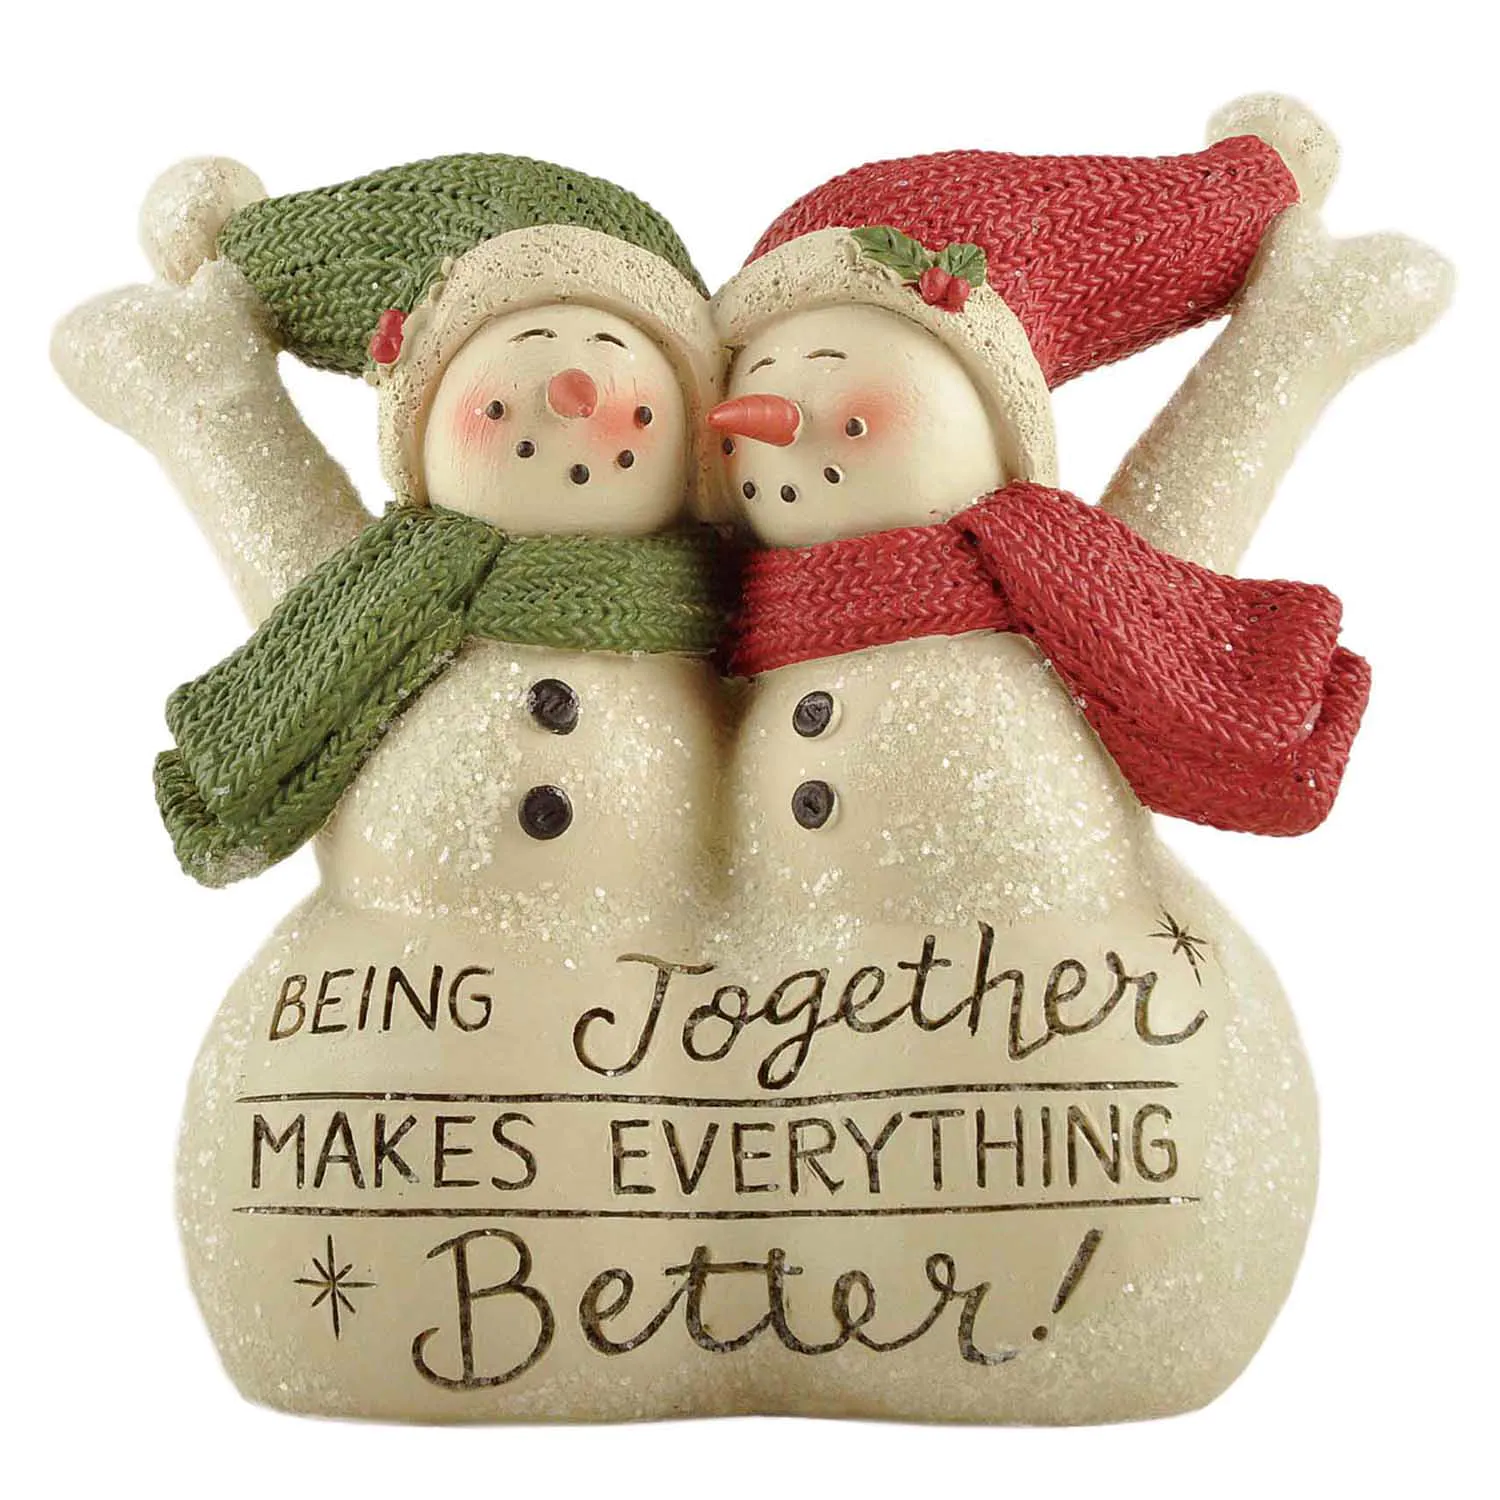 Customized Warm Embrace of Friendship Handcrafted Snowman Duo Figurine with Heartwarming Sentiment for Home Decor 238-13795